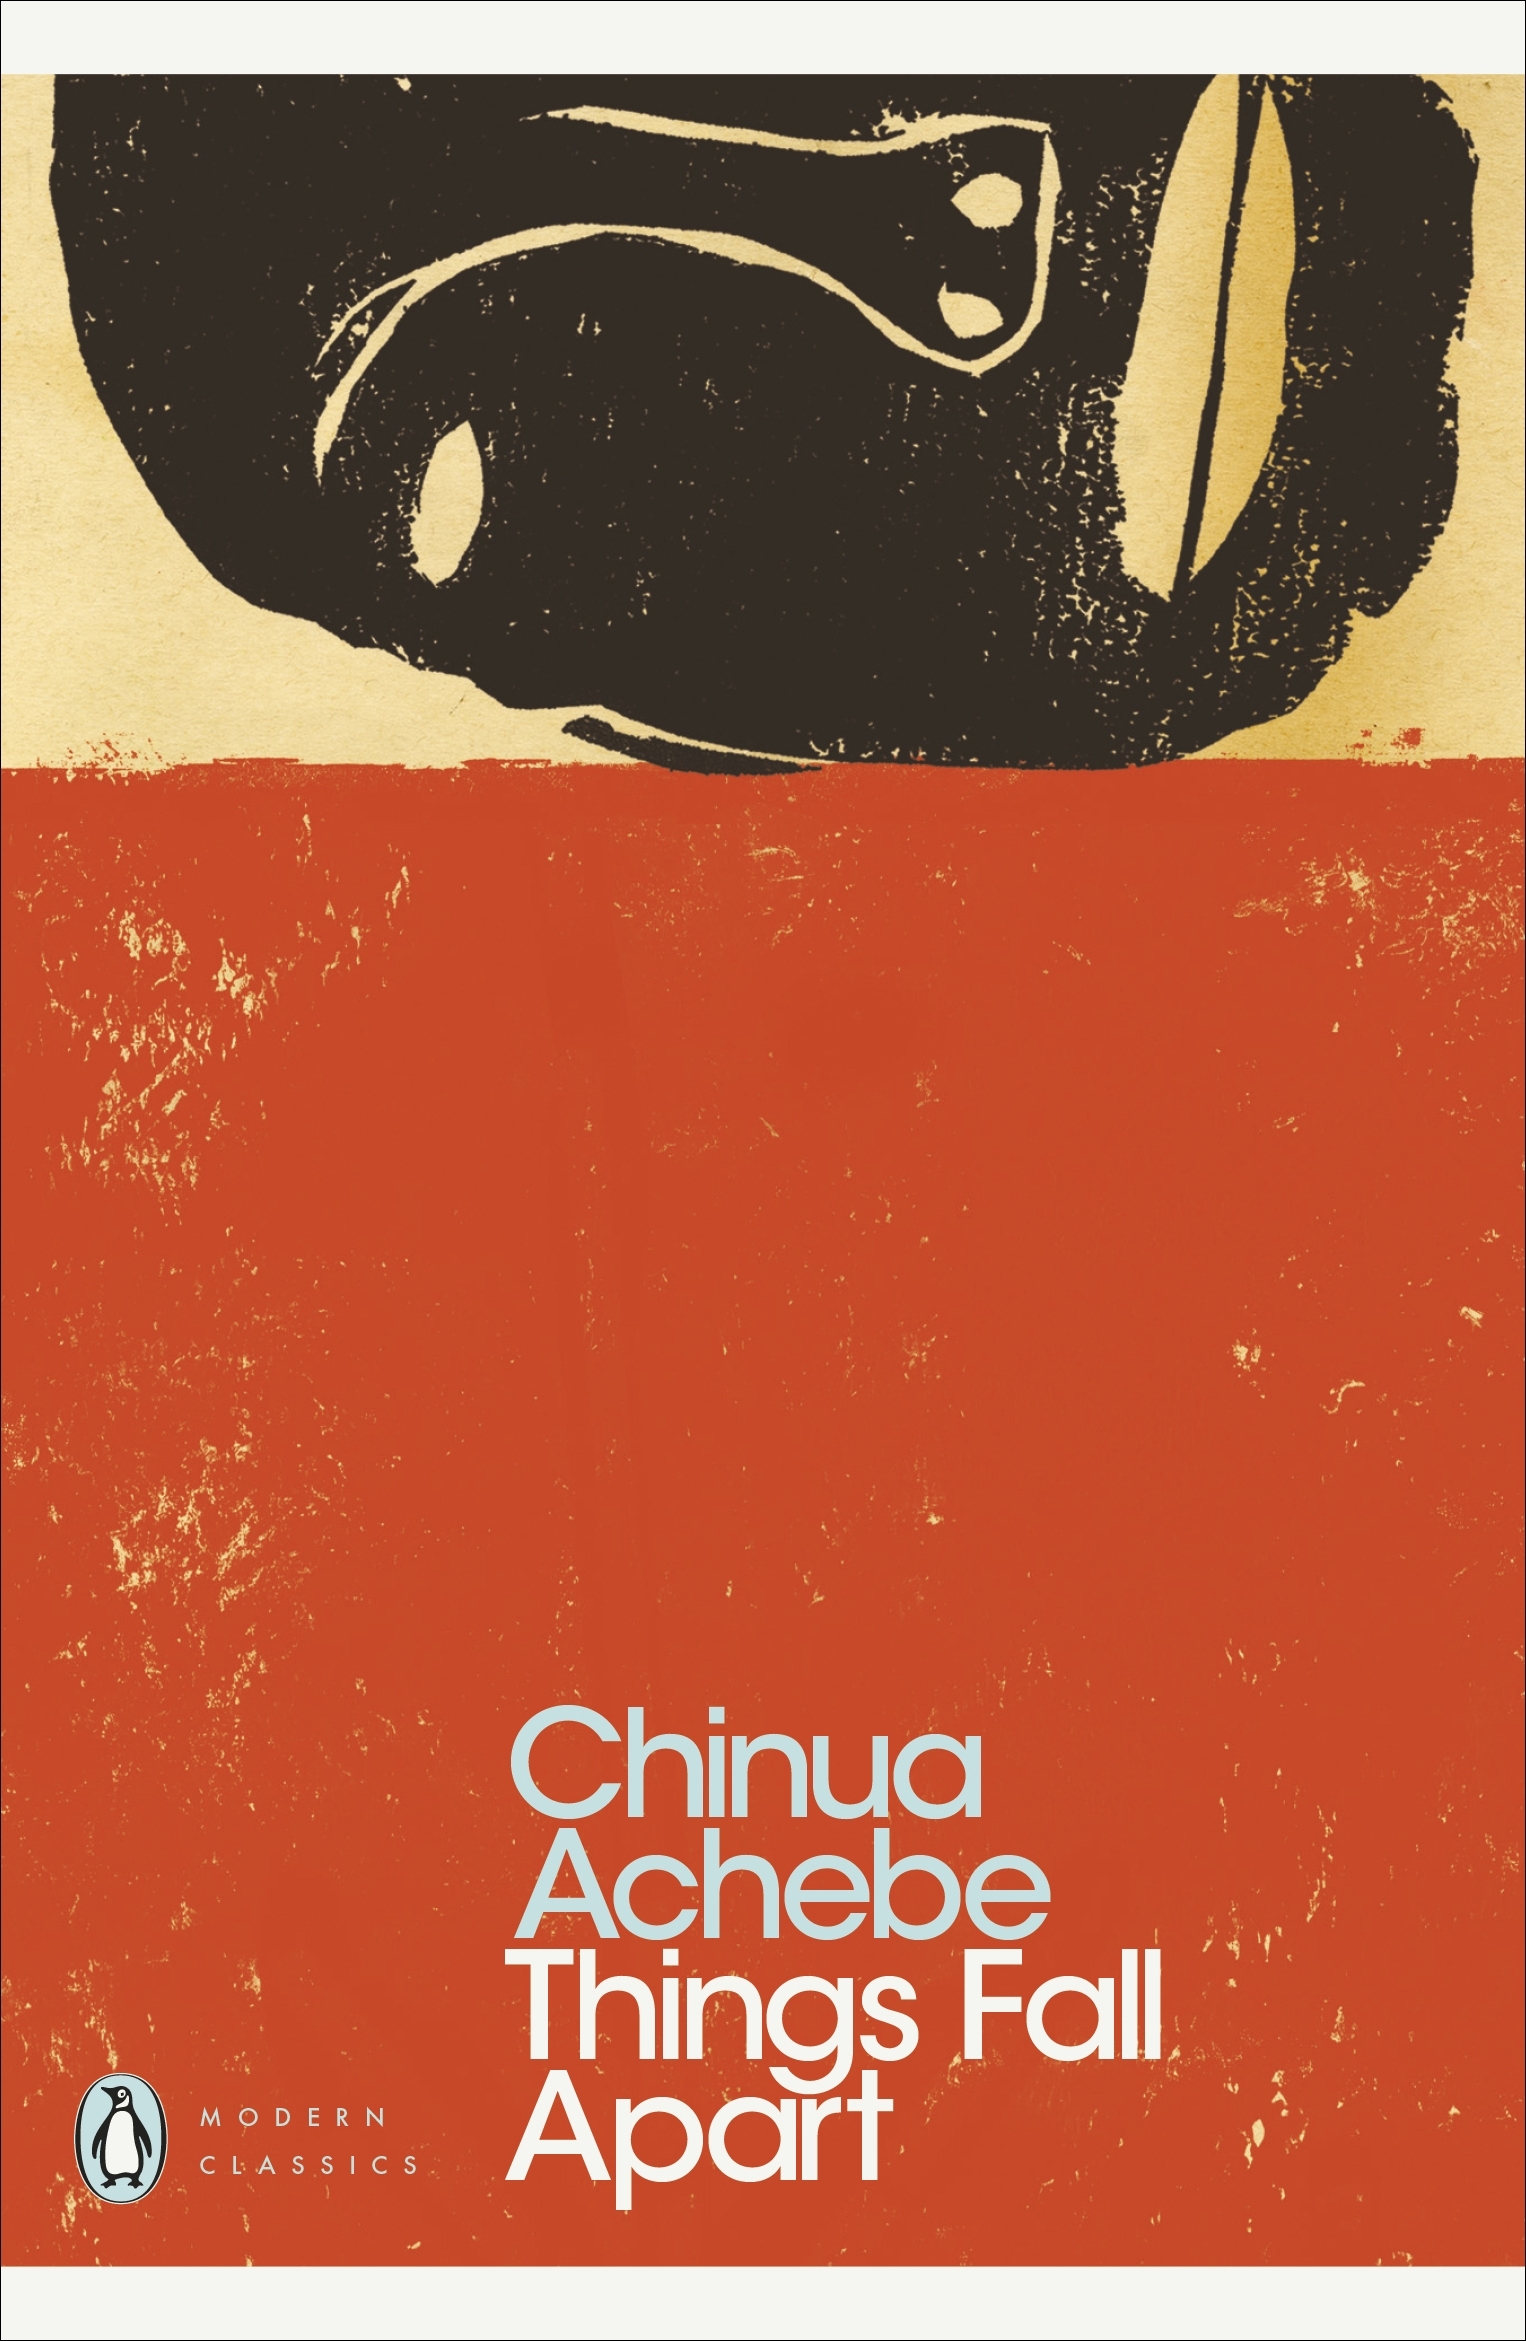 research paper on things fall apart by chinua achebe